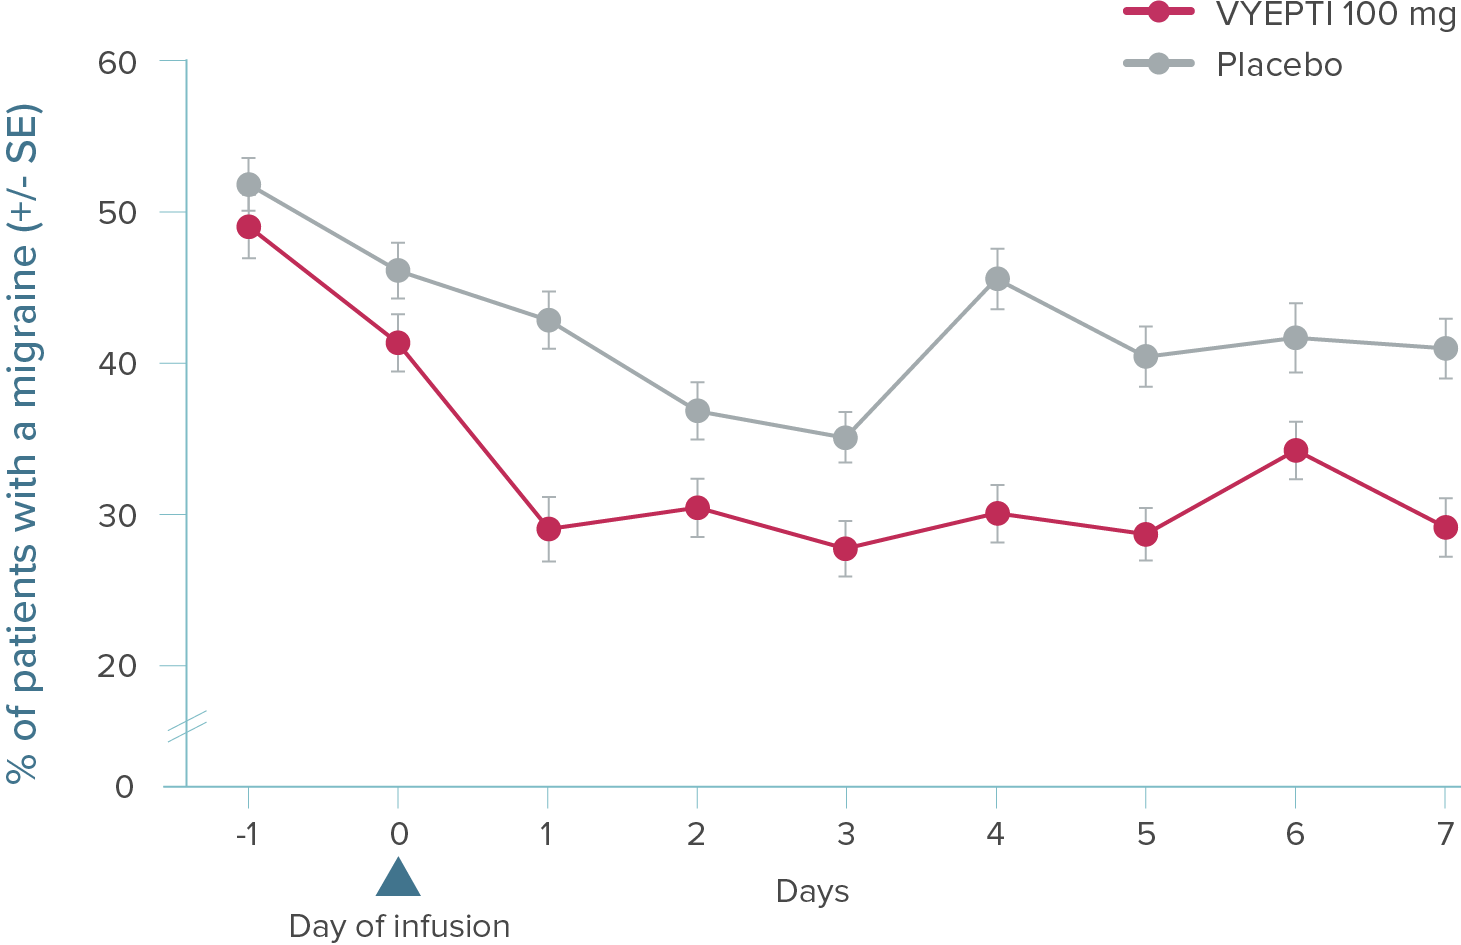 Graph showing that fewer patients treated with VYEPTI 100 mg experienced a migraine during the first 7 days of treatment compared to placebo.